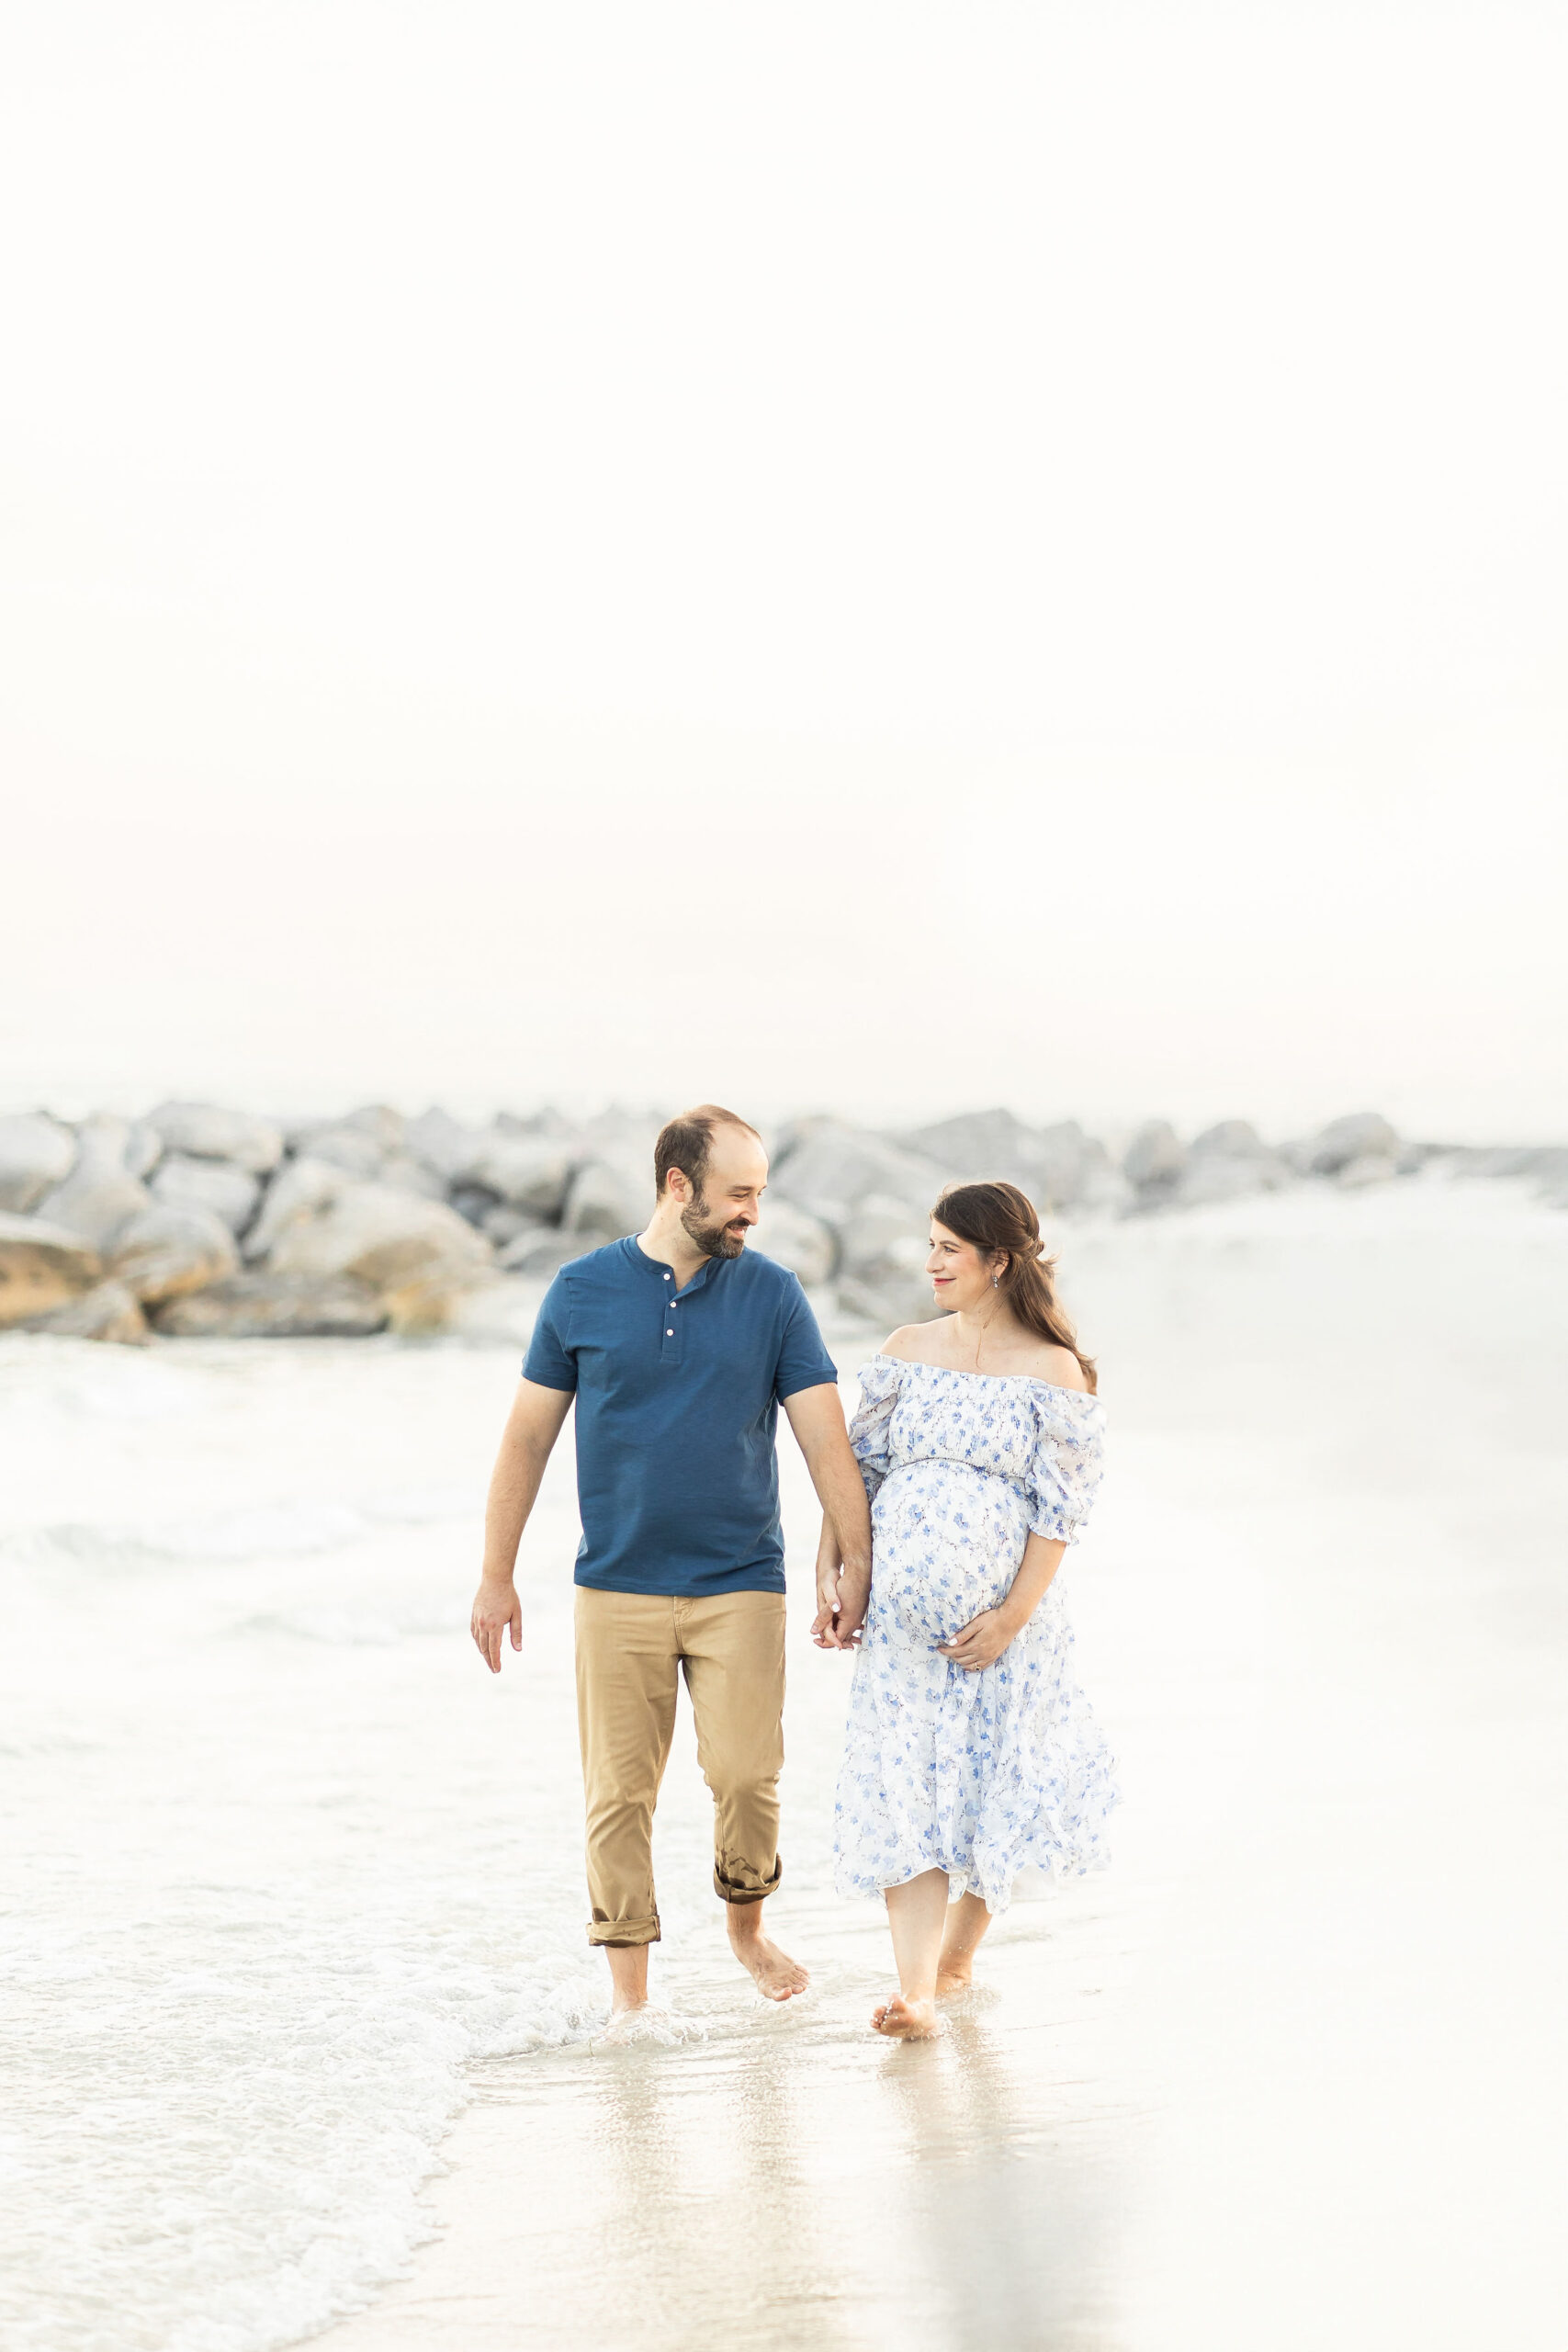 A mom to be and her partner walk down a beach holding hands by in the water fertility acupunture miami